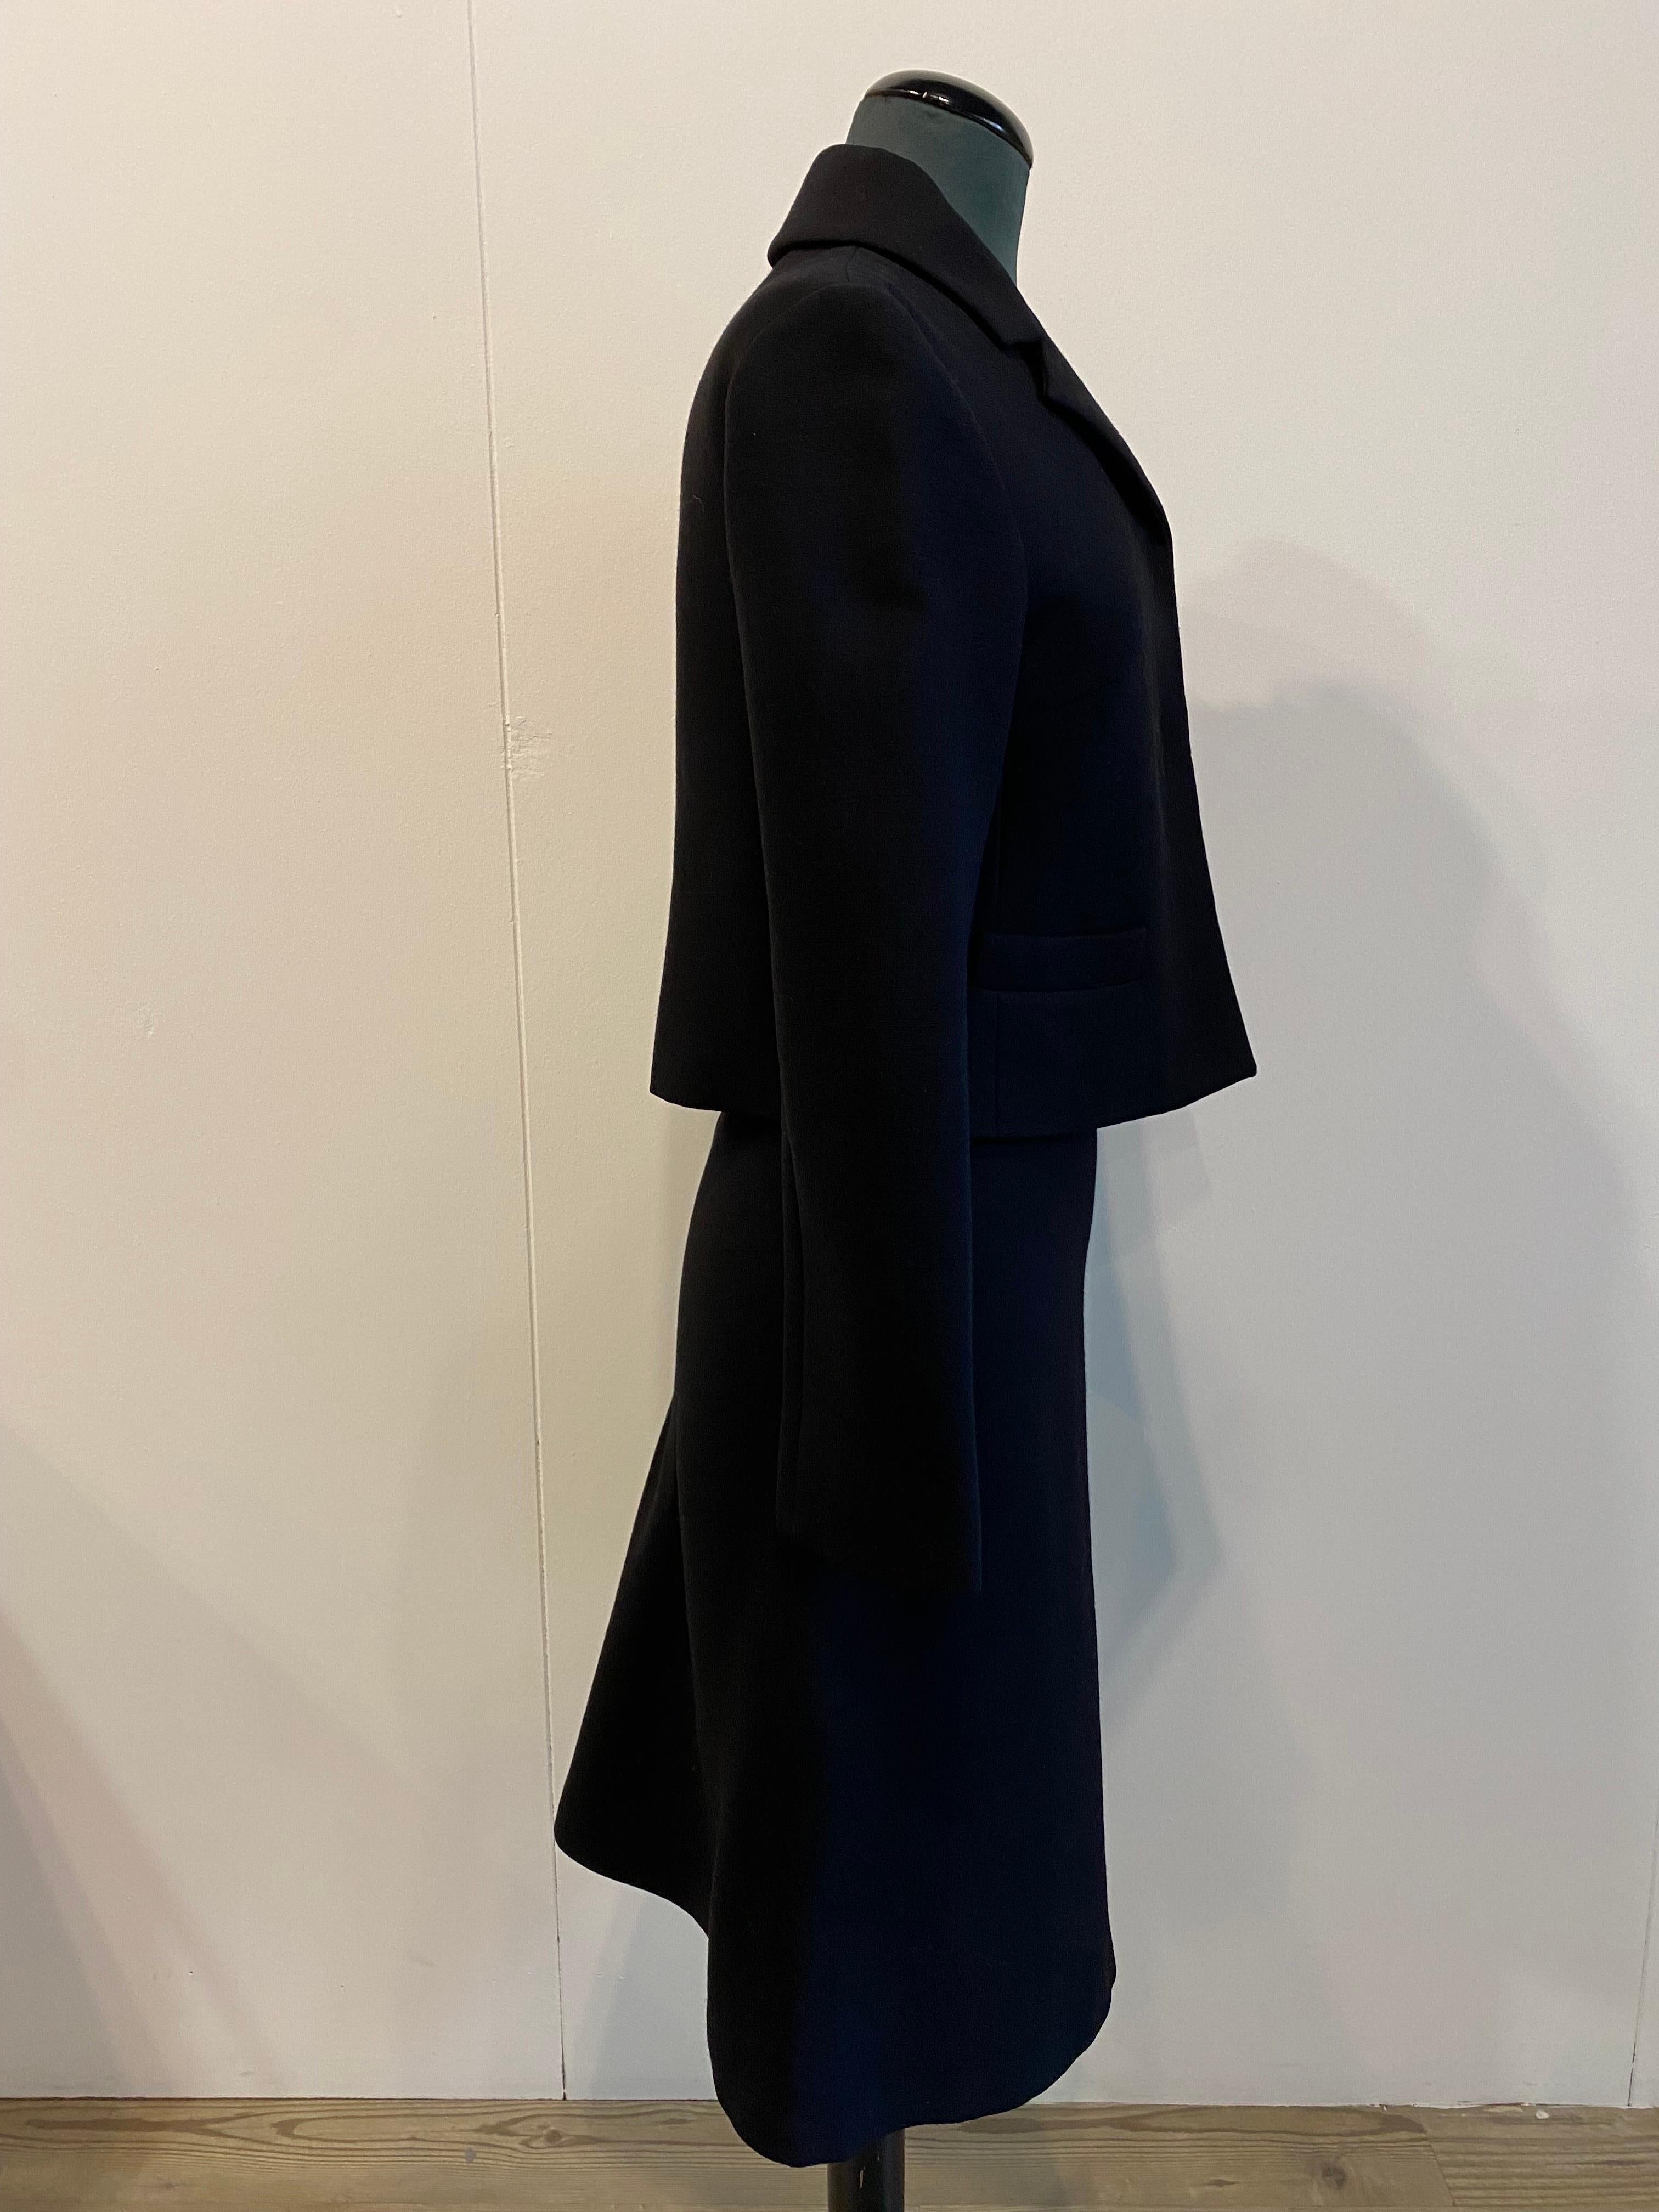 Tailleur Miu Miu black In Excellent Condition For Sale In Carnate, IT